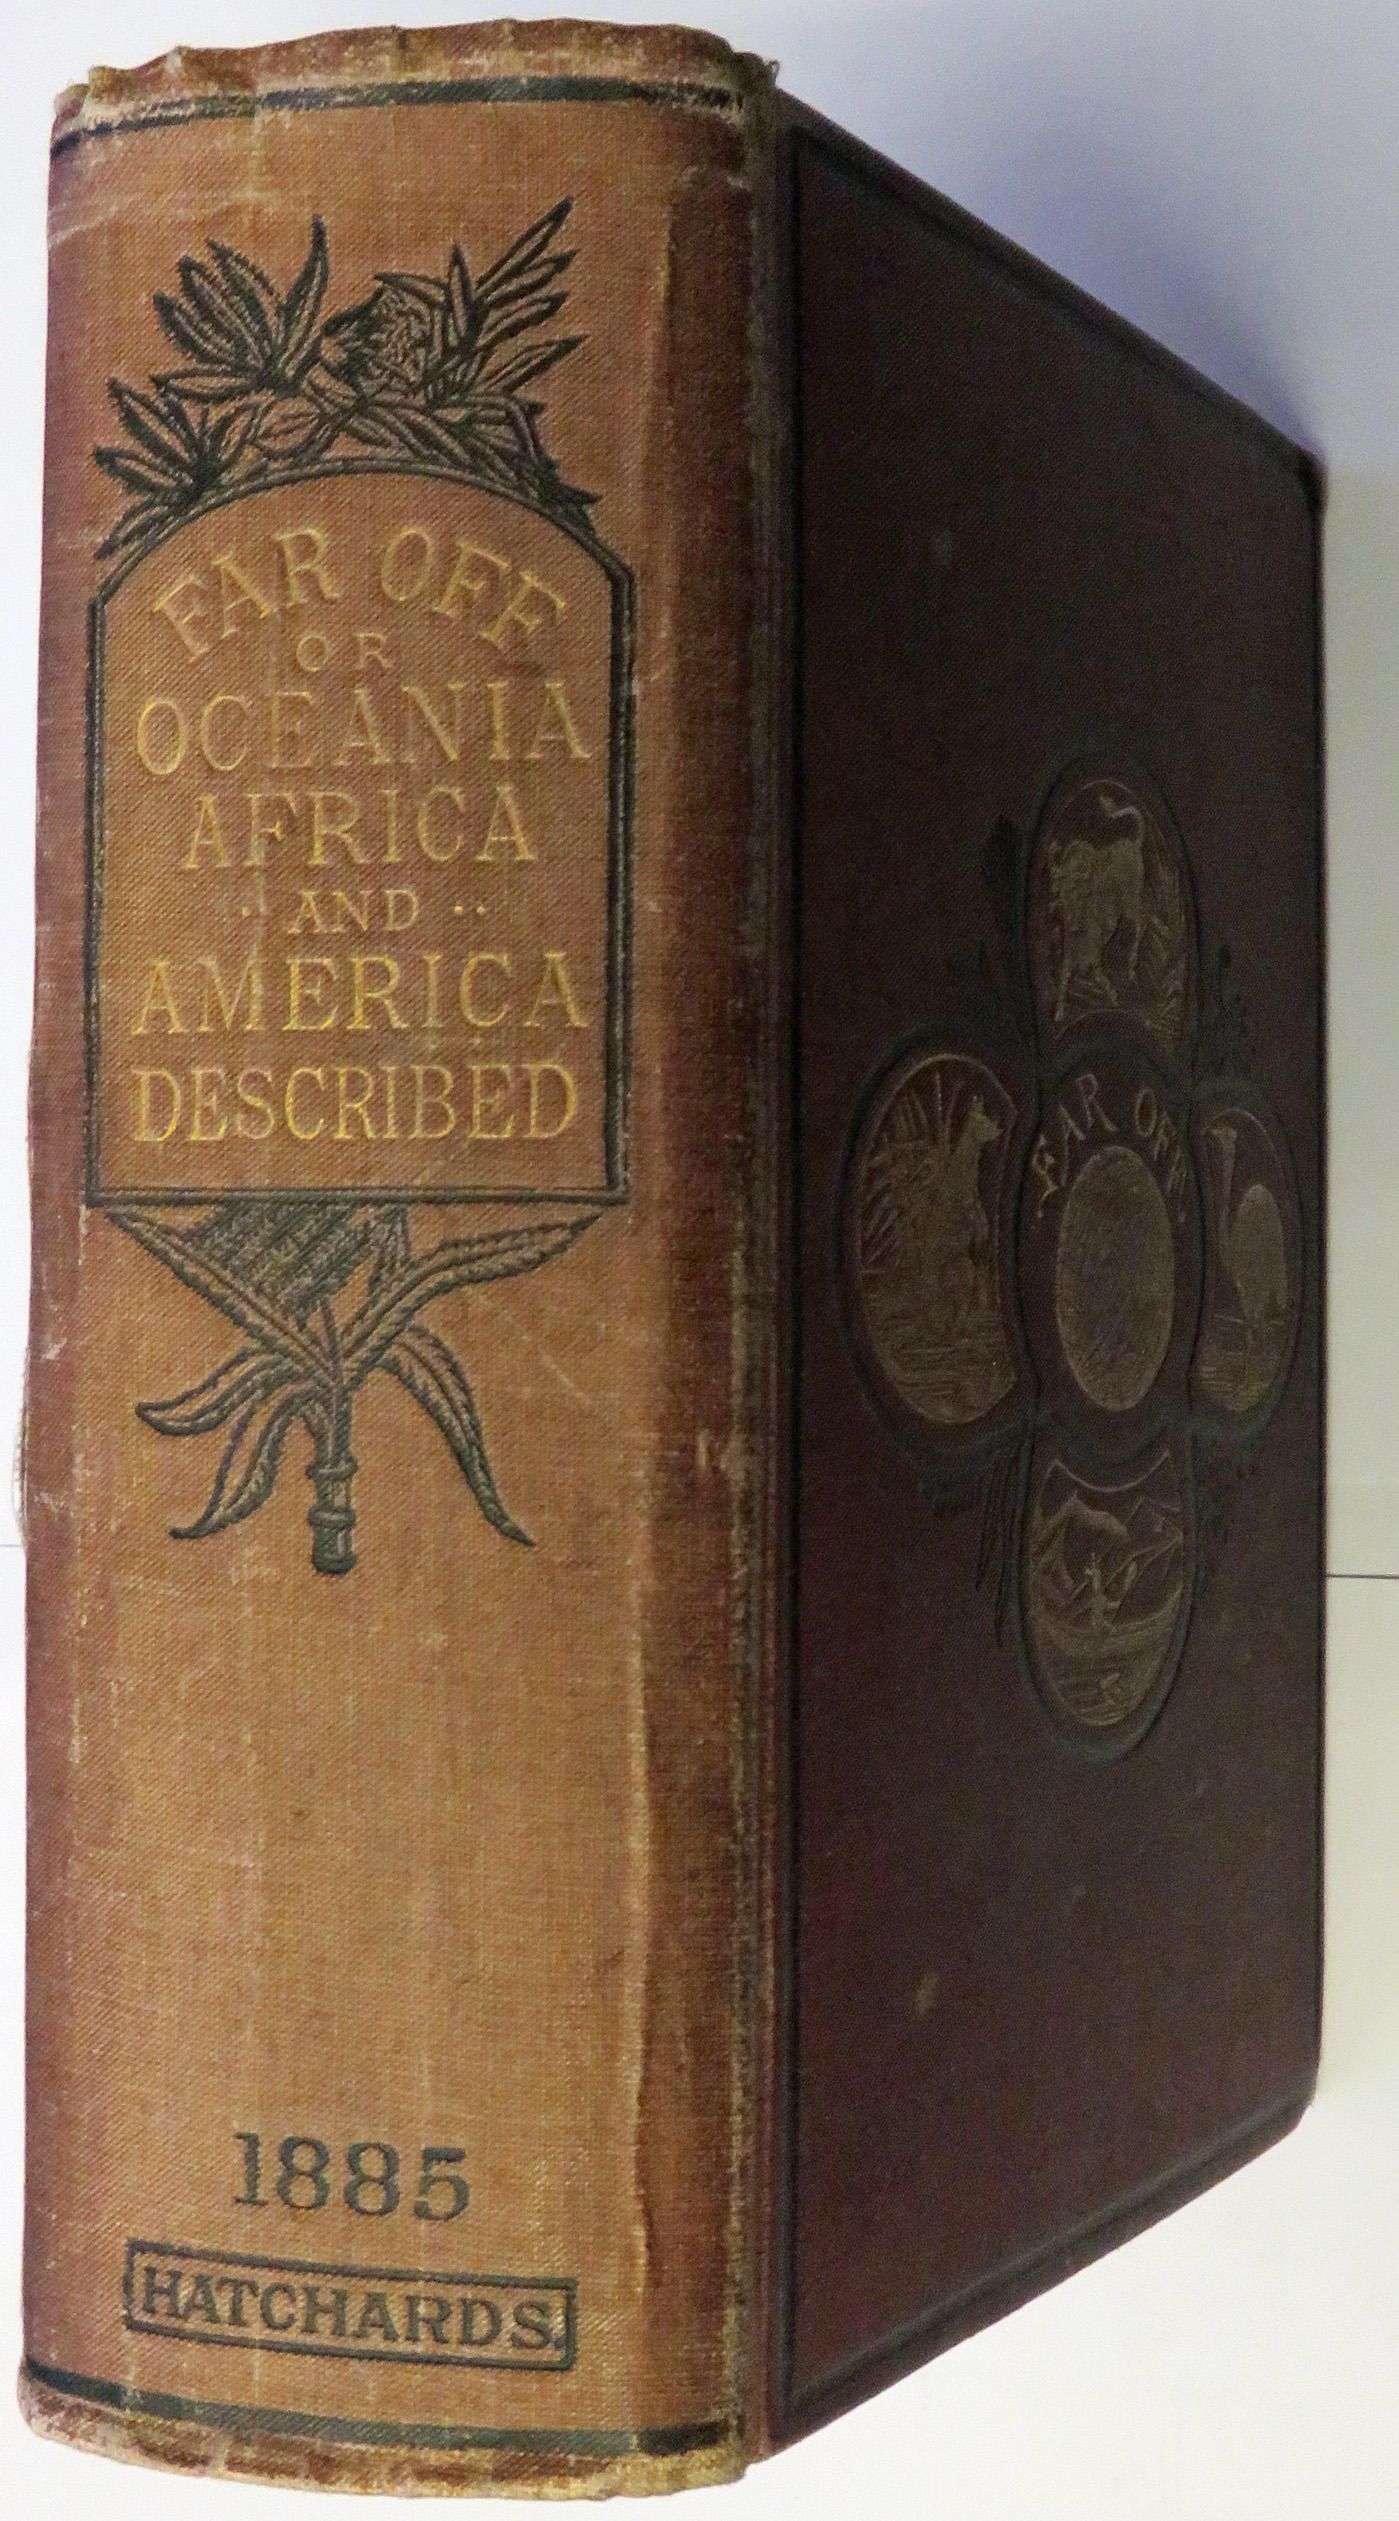 Far Off Part II Oceania, Africa, and America Described With Anecdotes and Two Hundred Illustrations